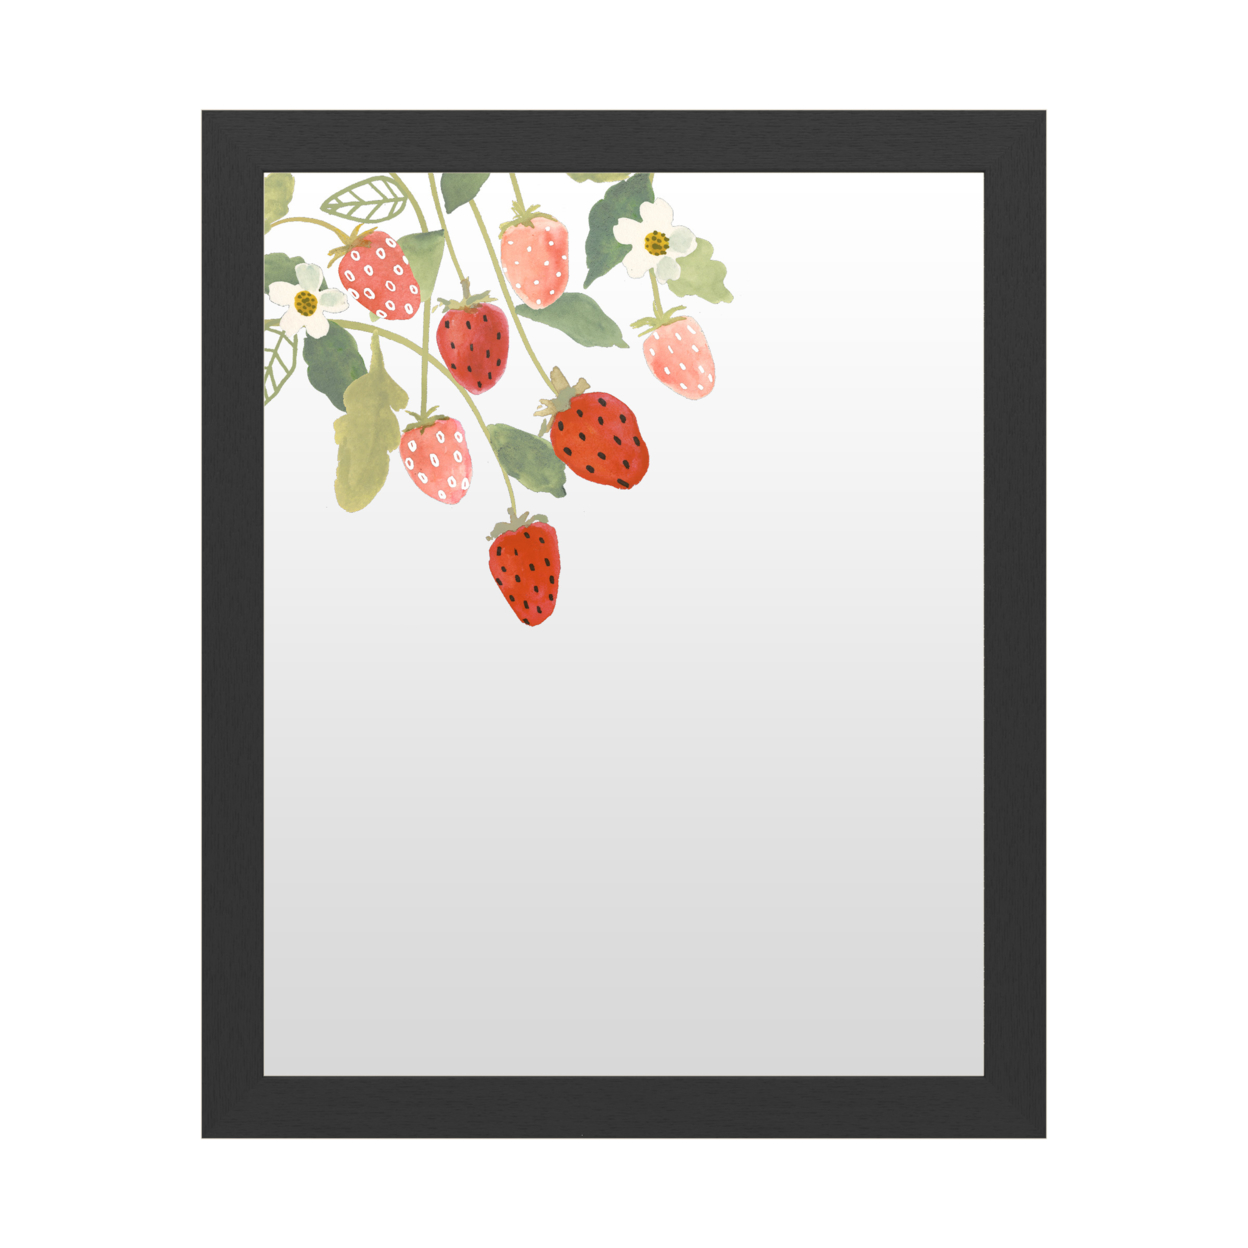 Dry Erase 16 X 20 Marker Board With Printed Artwork - Victoria Borges Fresh Fruit I White Board - Ready To Hang